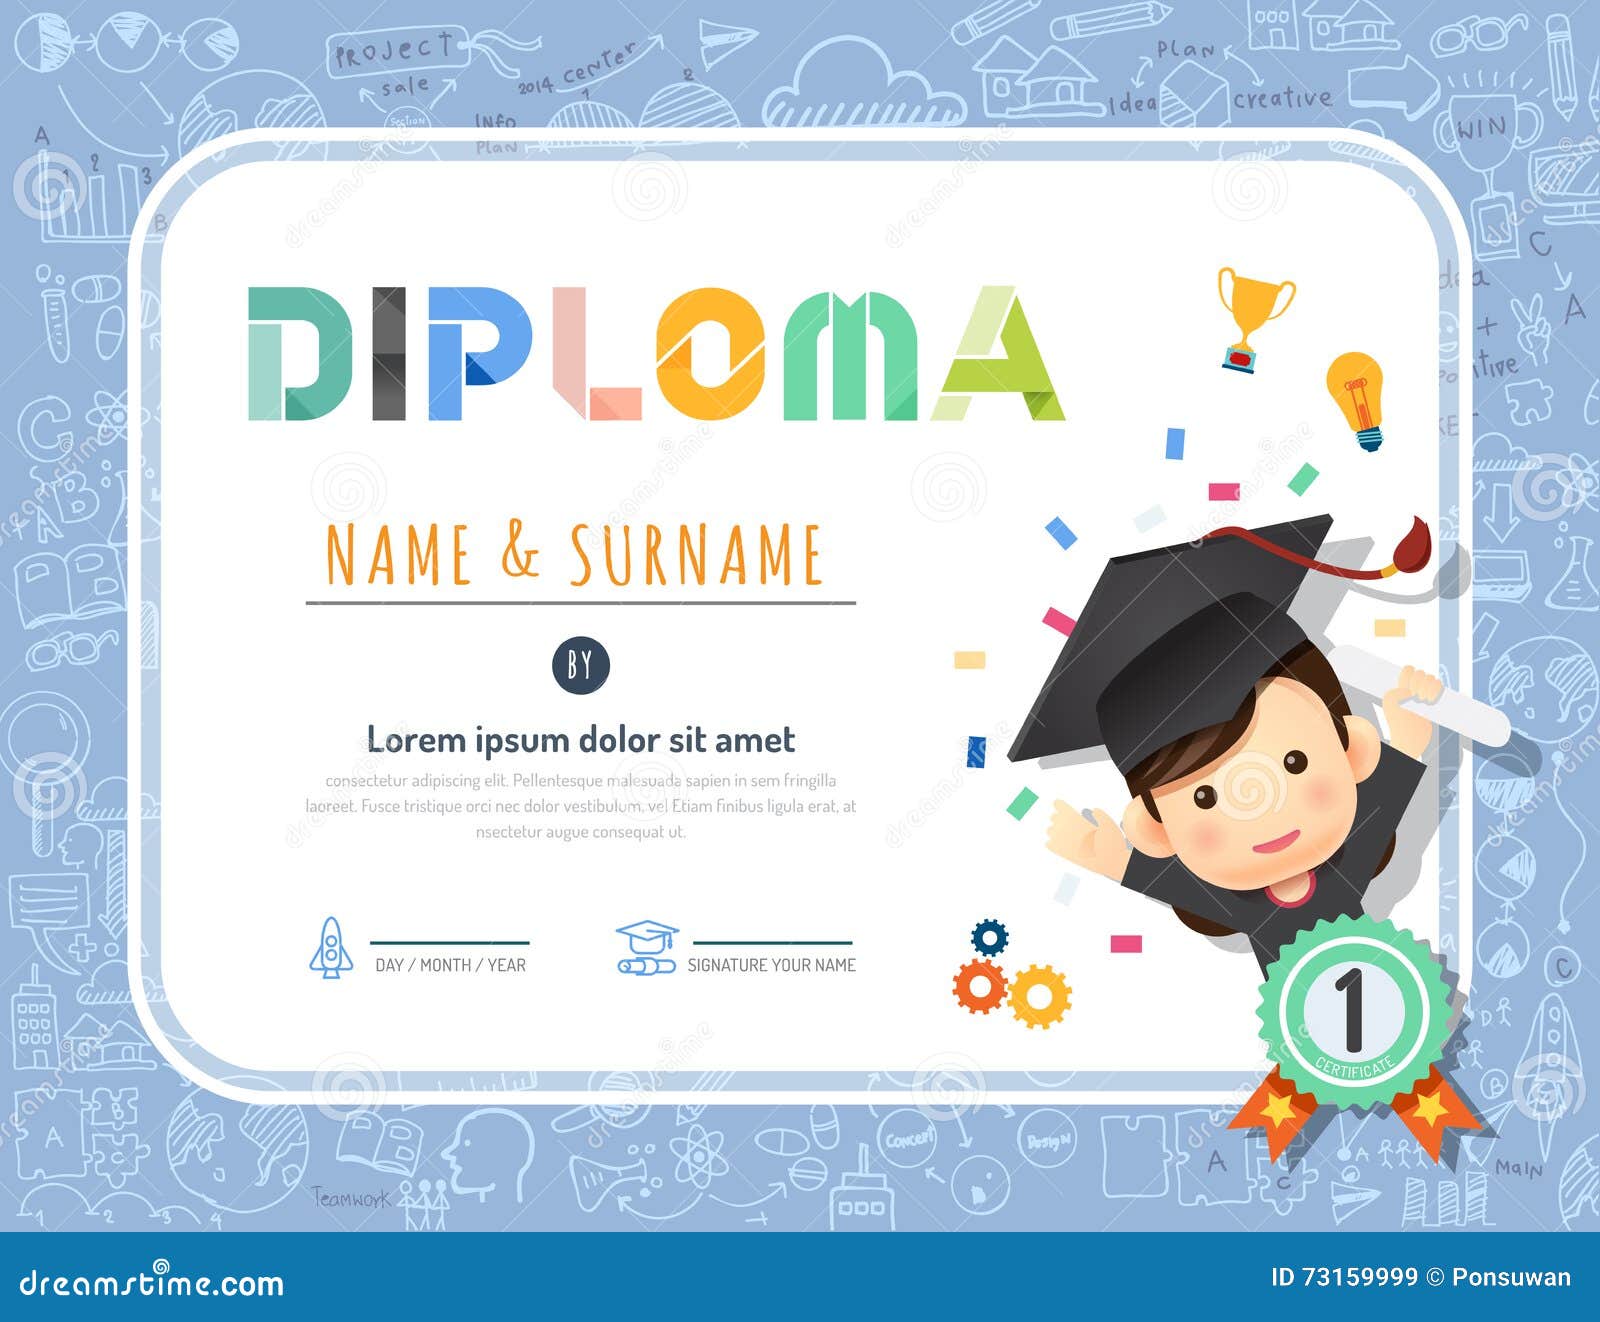 Diploma With African Wild Animals Sketch Elephant Certificate Template  Download on Pngtree